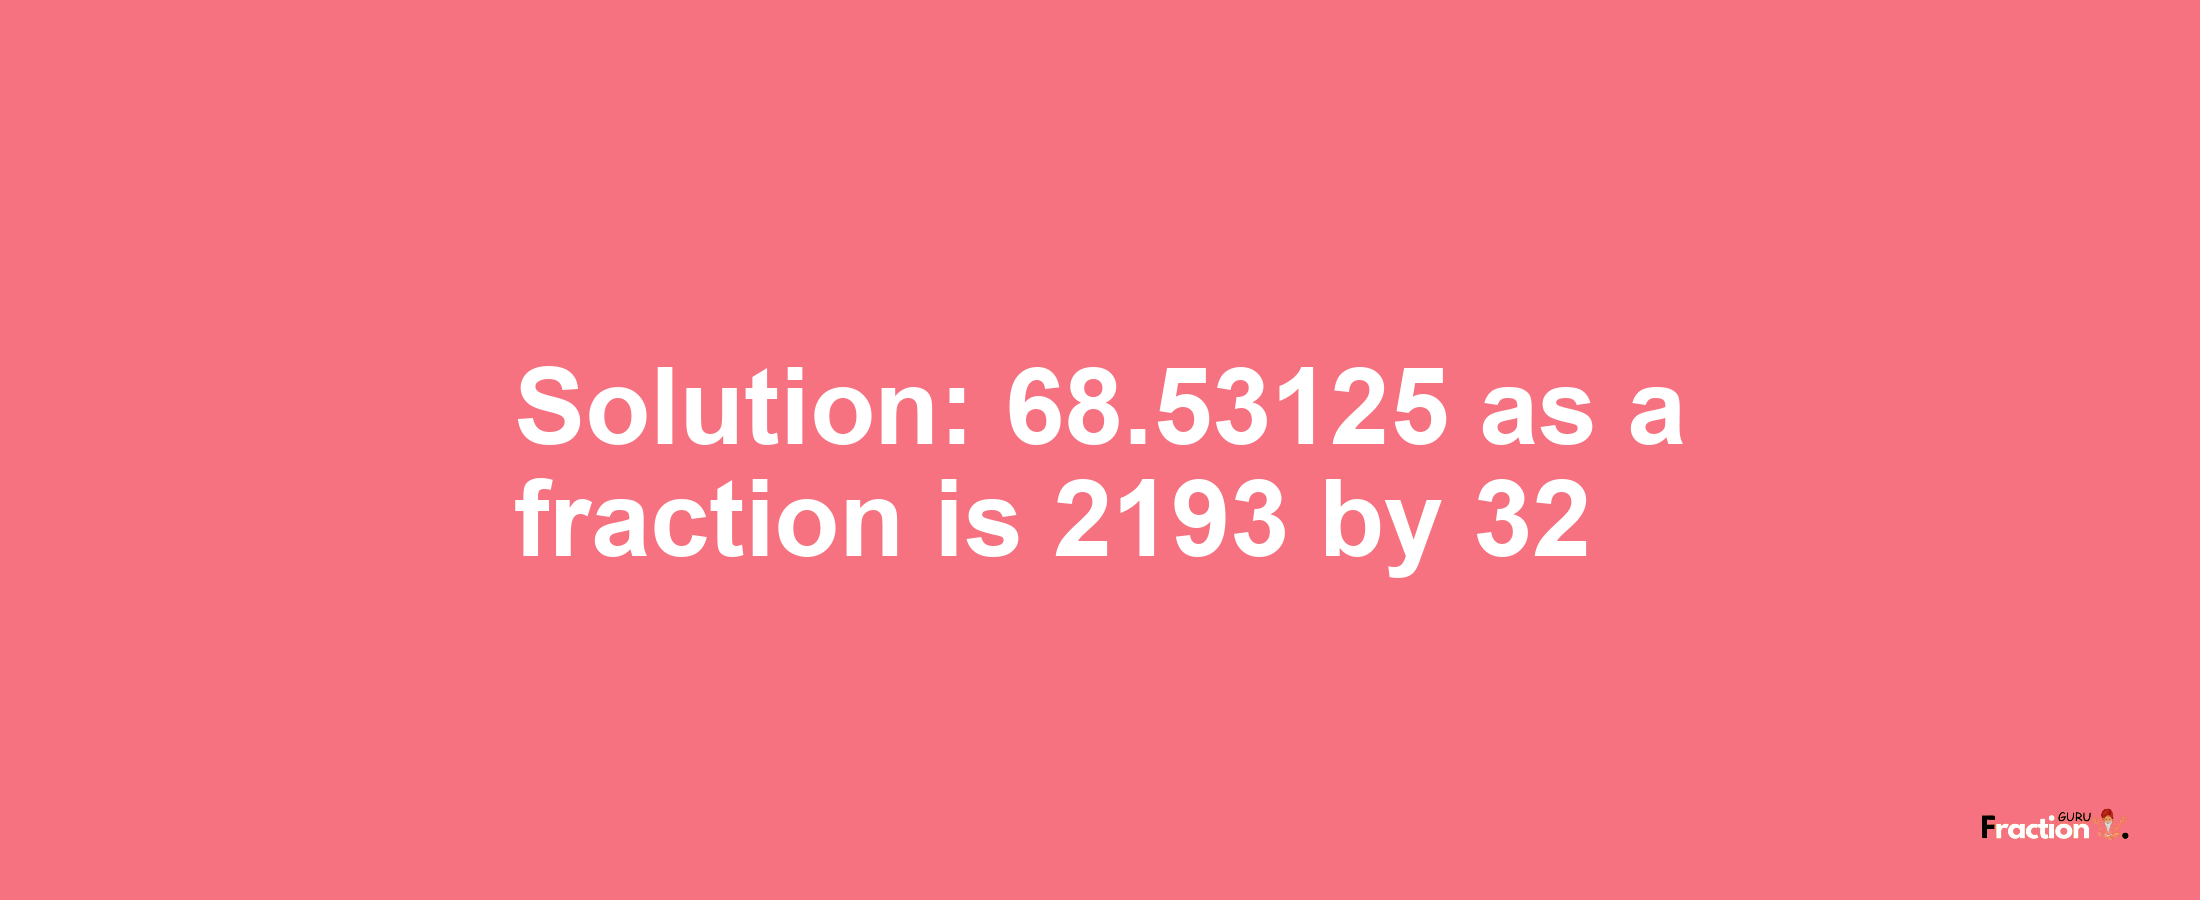 Solution:68.53125 as a fraction is 2193/32